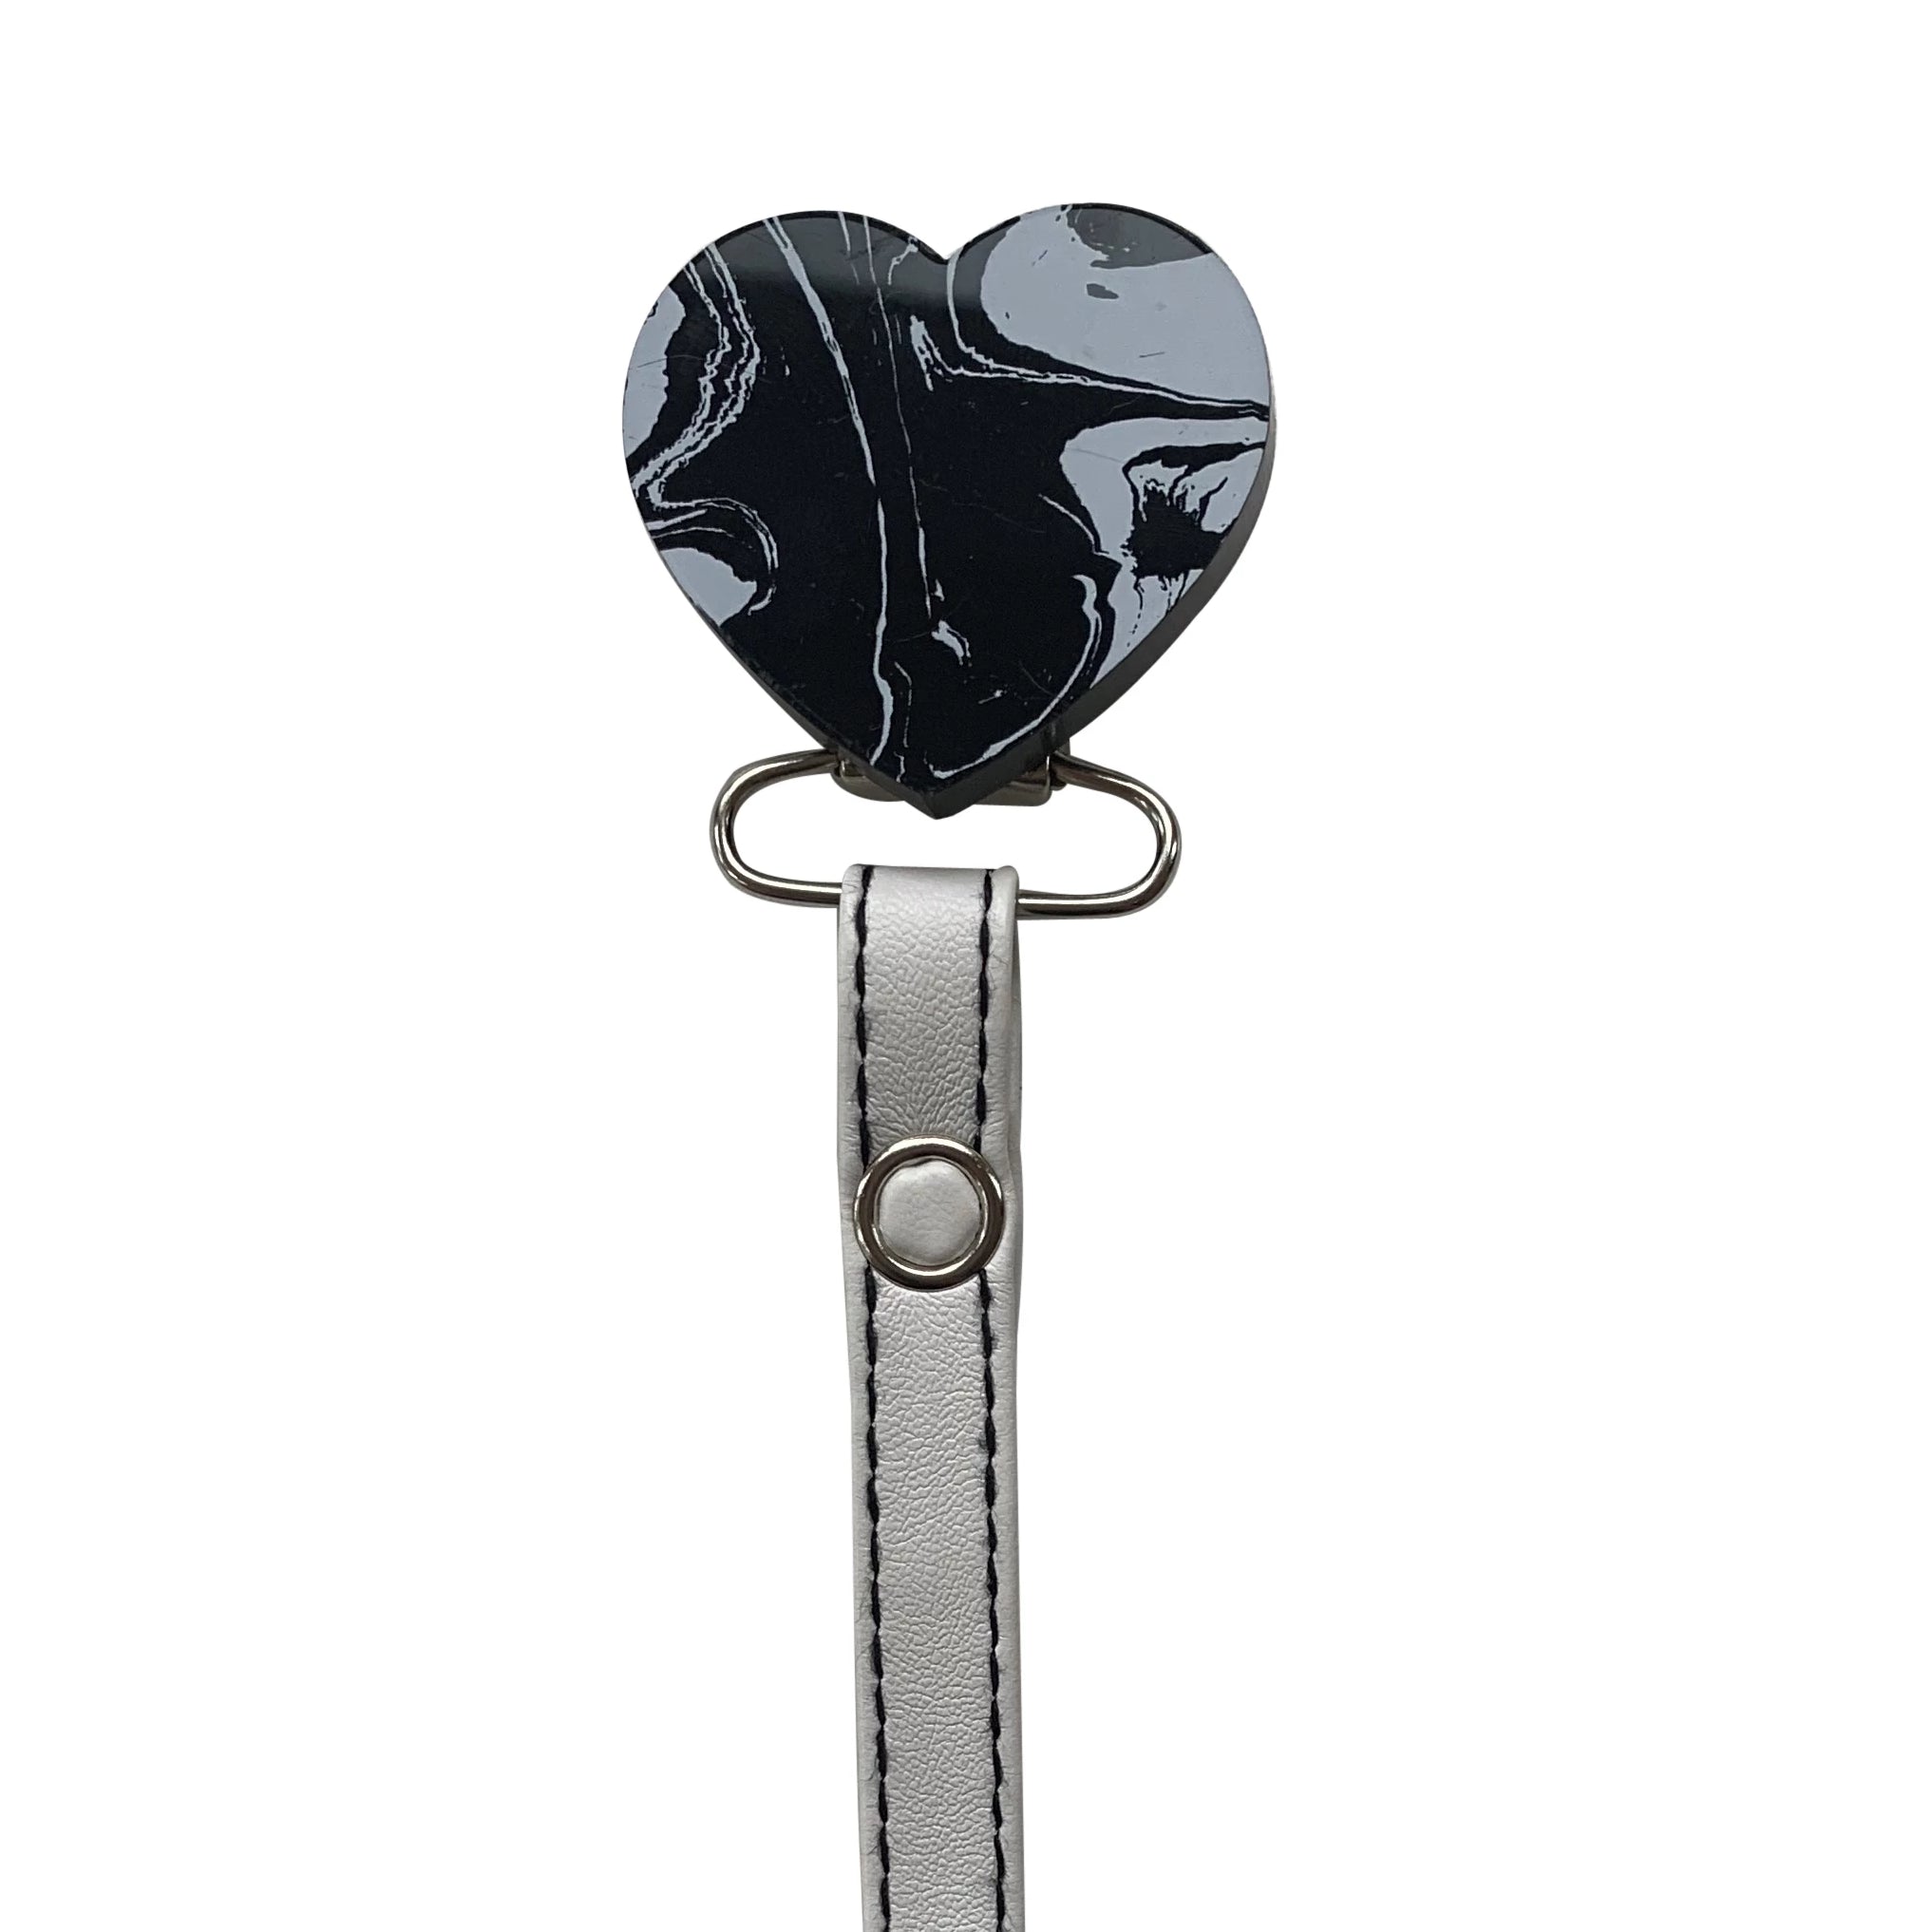 Classy Paci MARBLE black and white heart clip with Bibs b/w glow pacifier GIFT SET